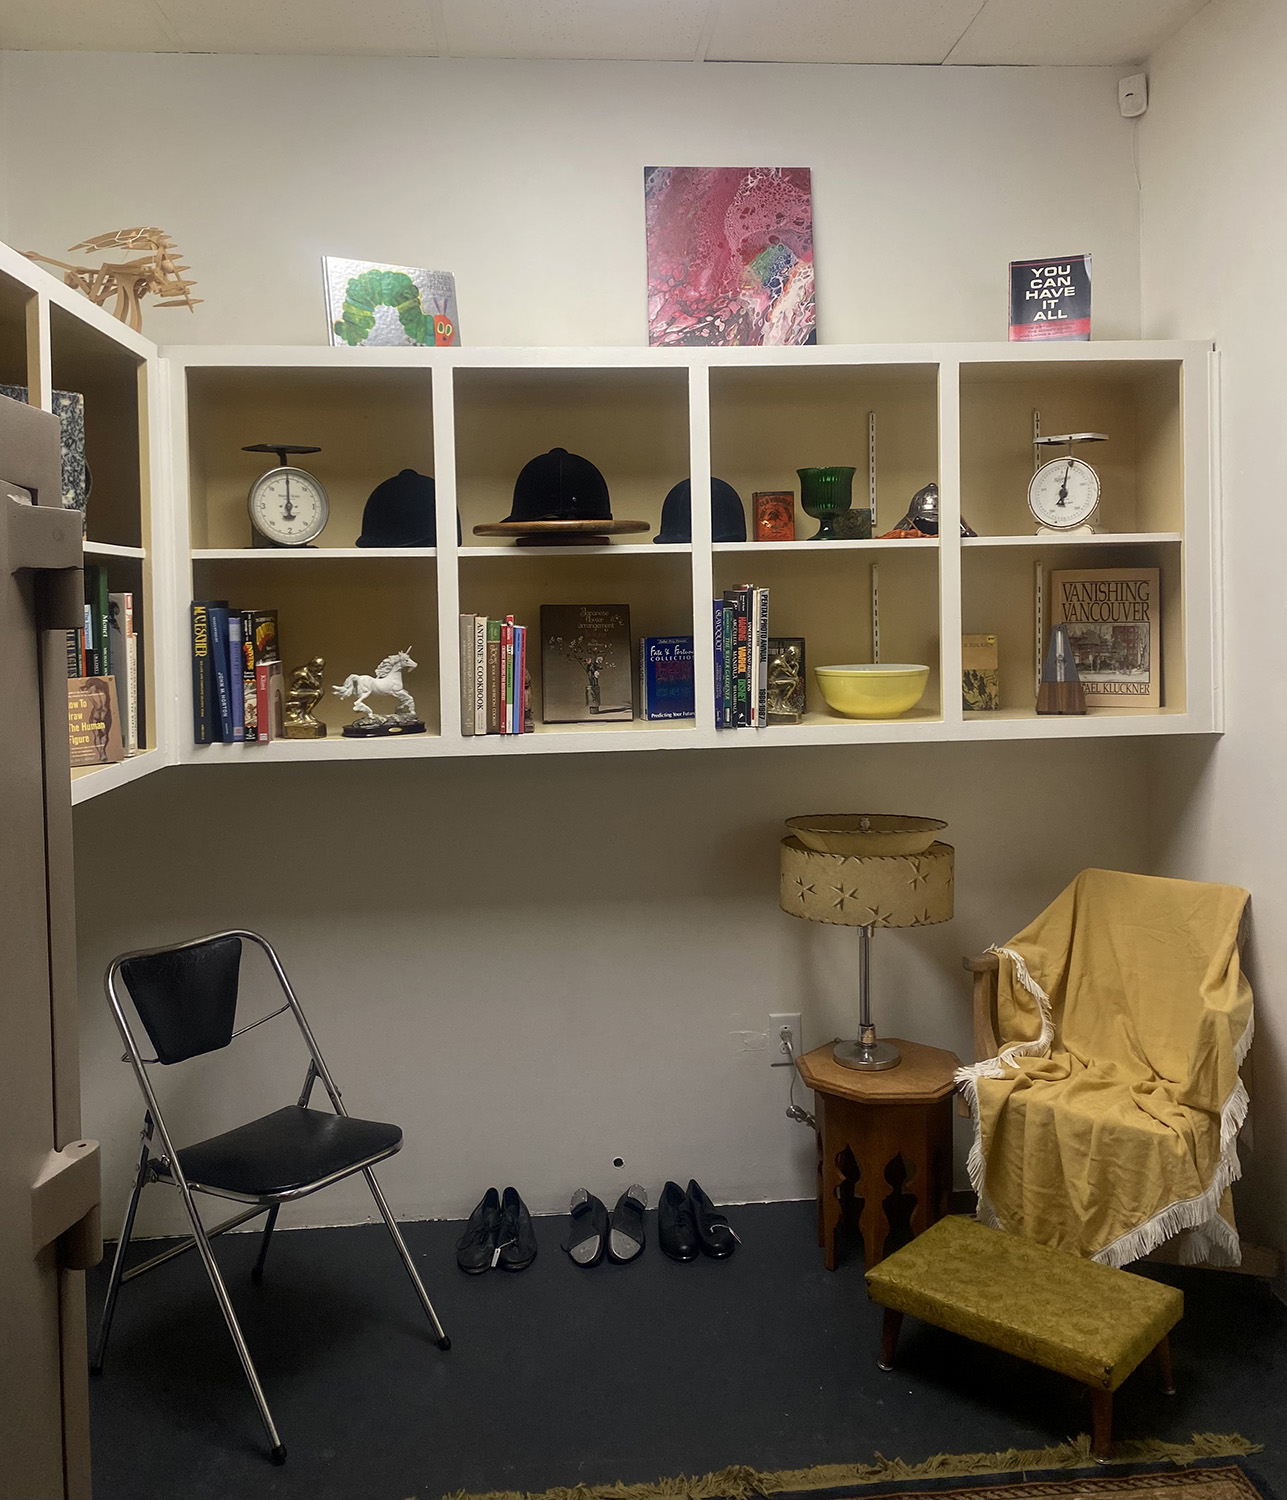 Seating area with two chairs and a cubed wall shelf in a thrift shop.